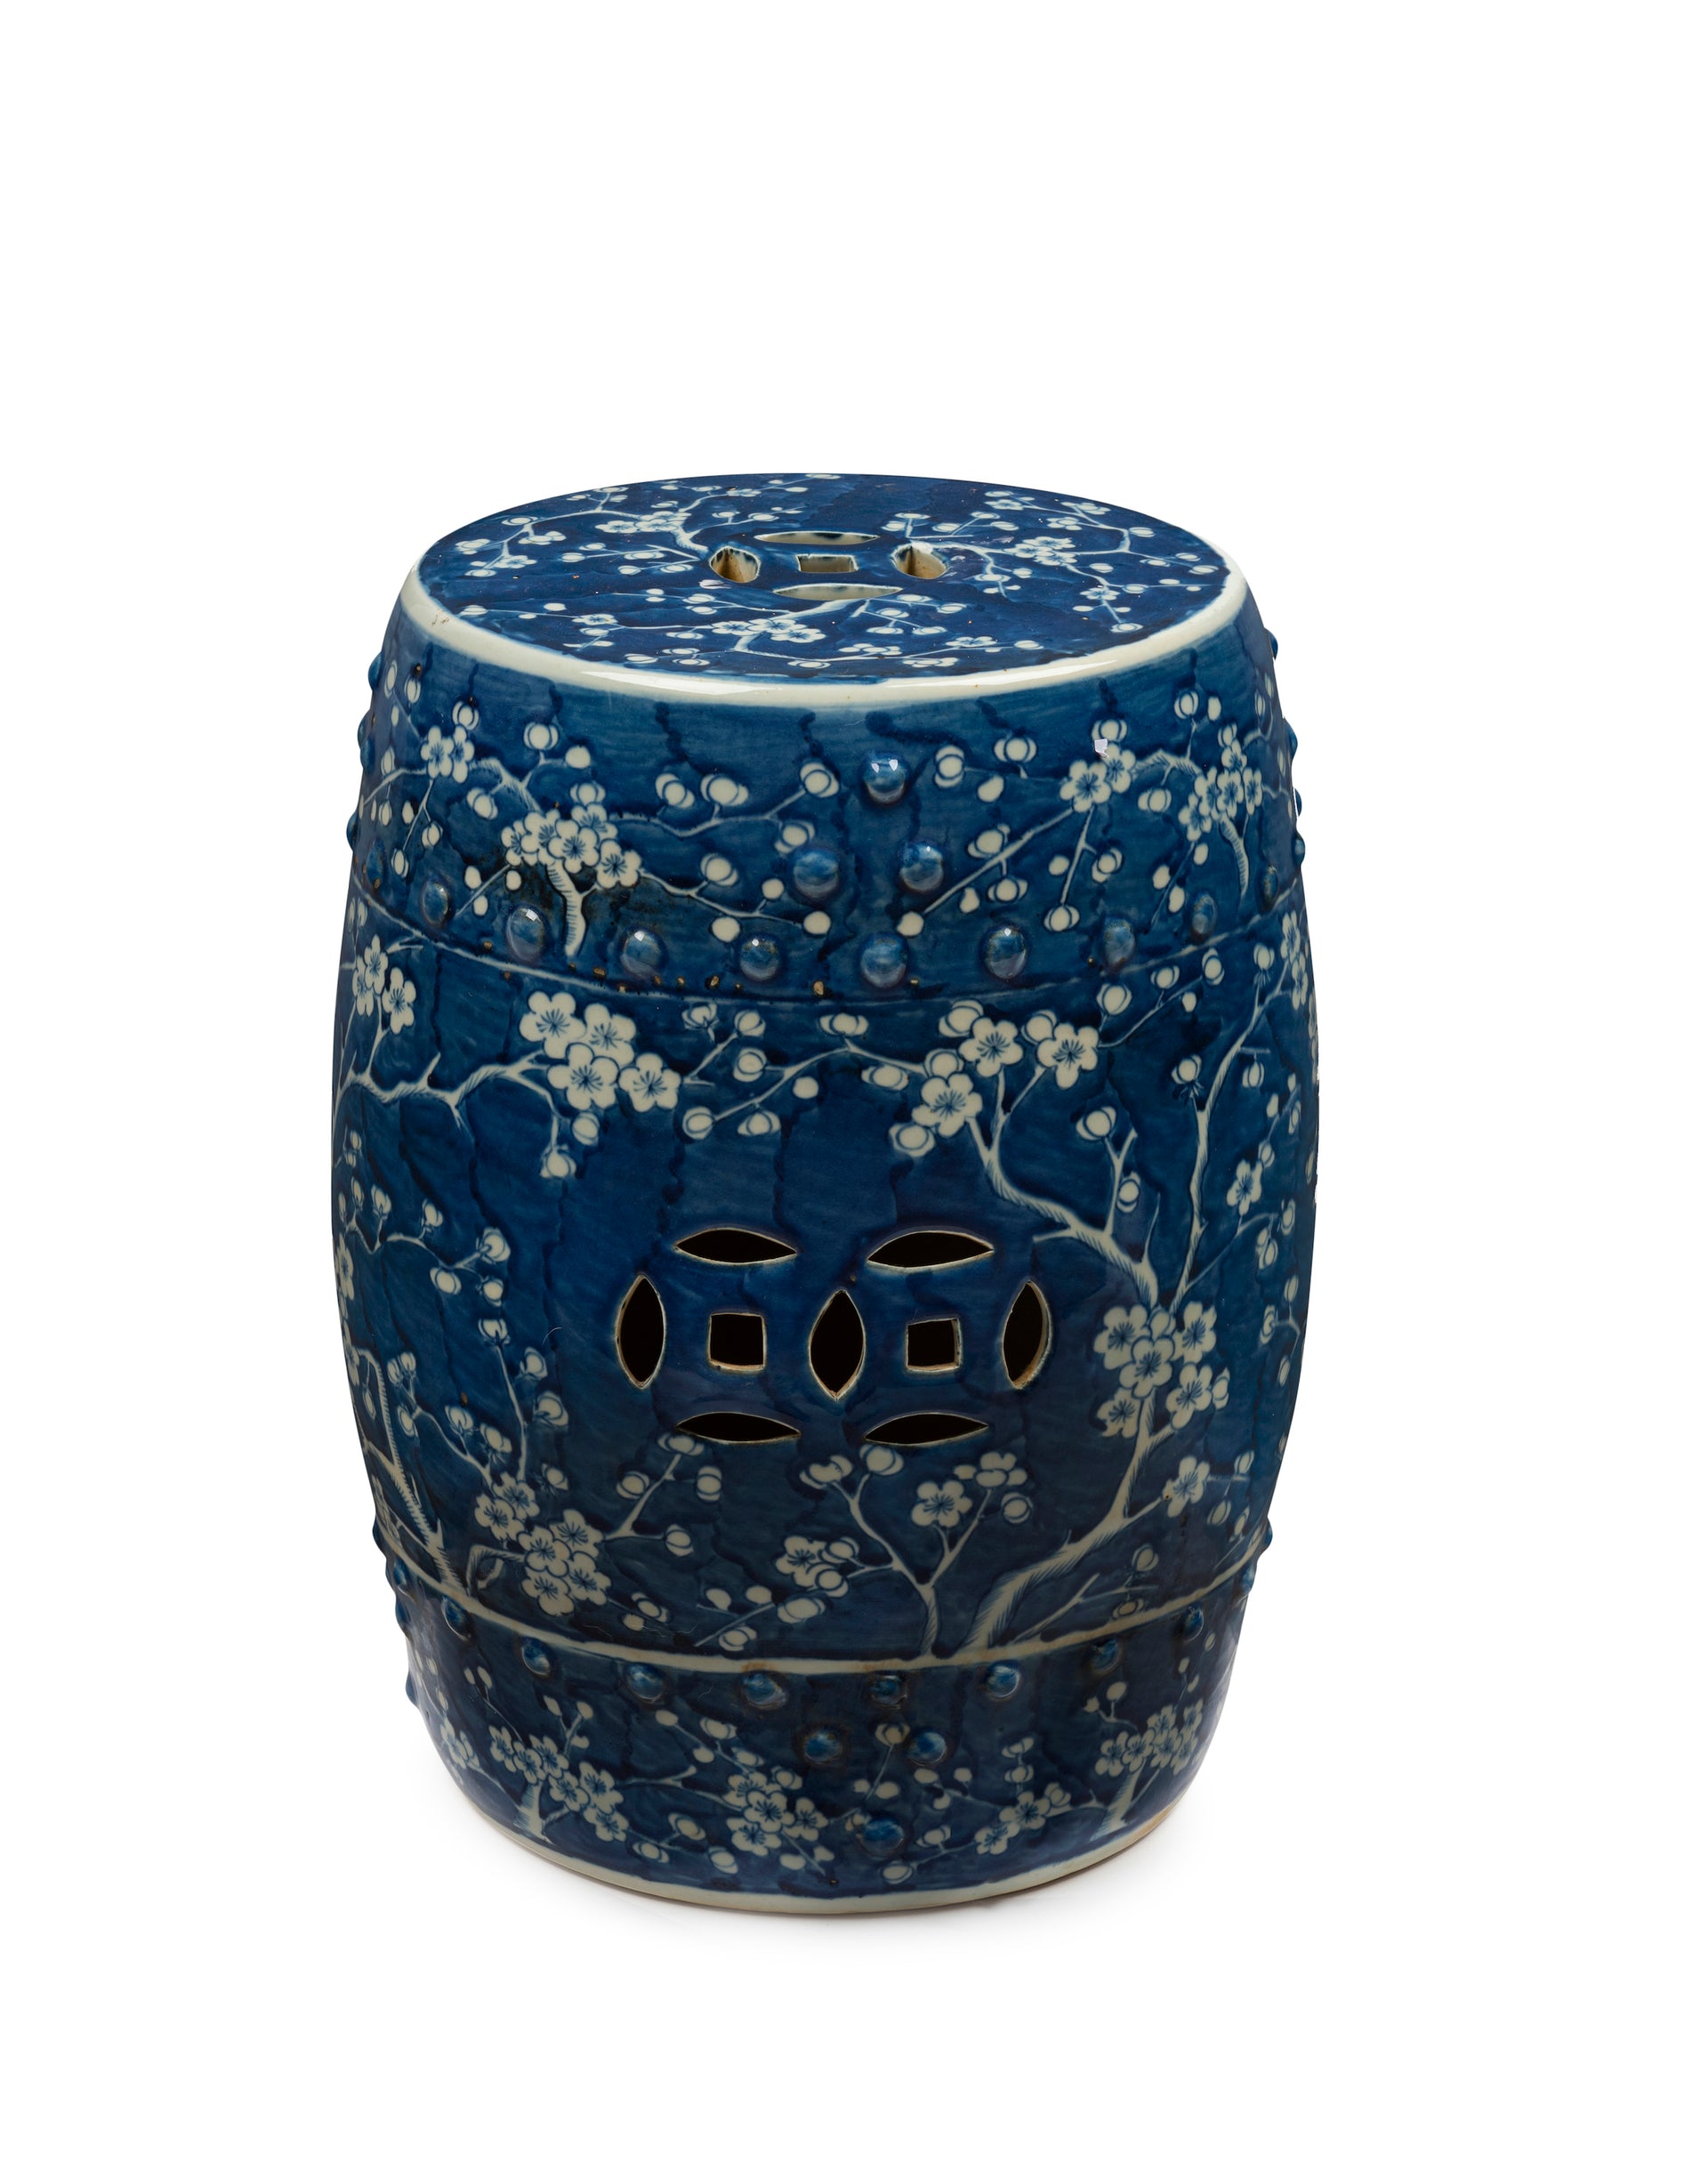 SOLD A blue and white cherry blossom design porcelain stool/ side table, Chinese 20th Century